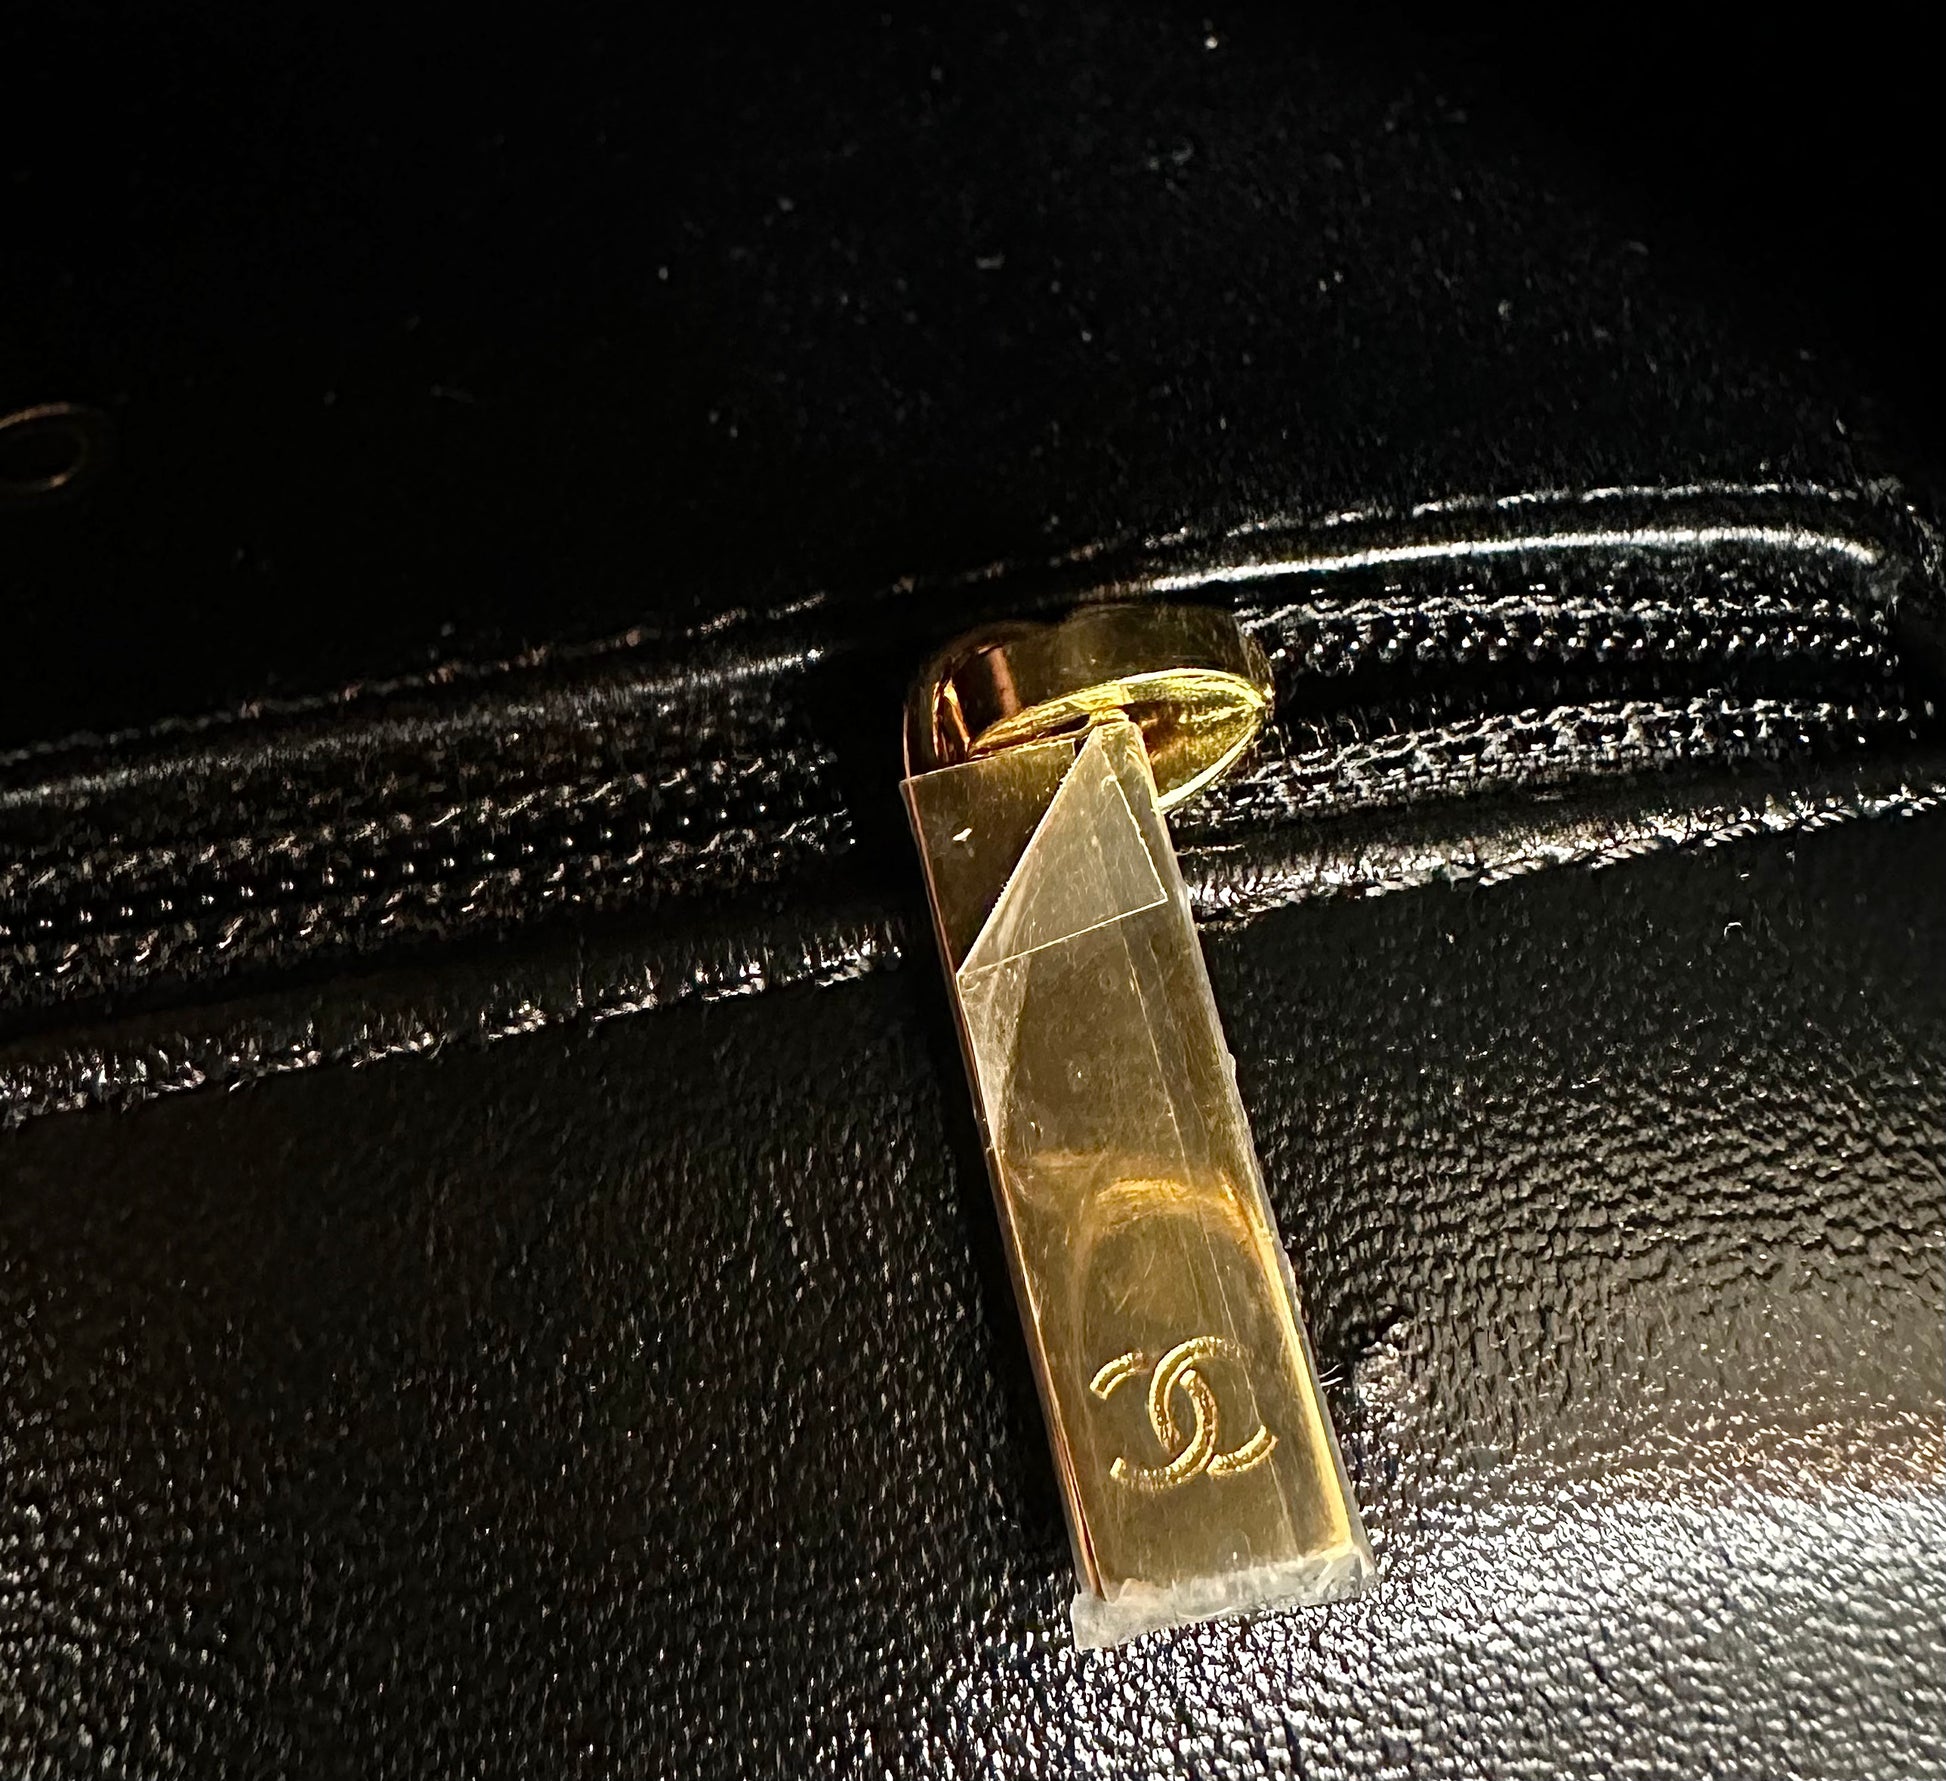 Close up of Chanel logo on gold interior zipper with plastic still on it